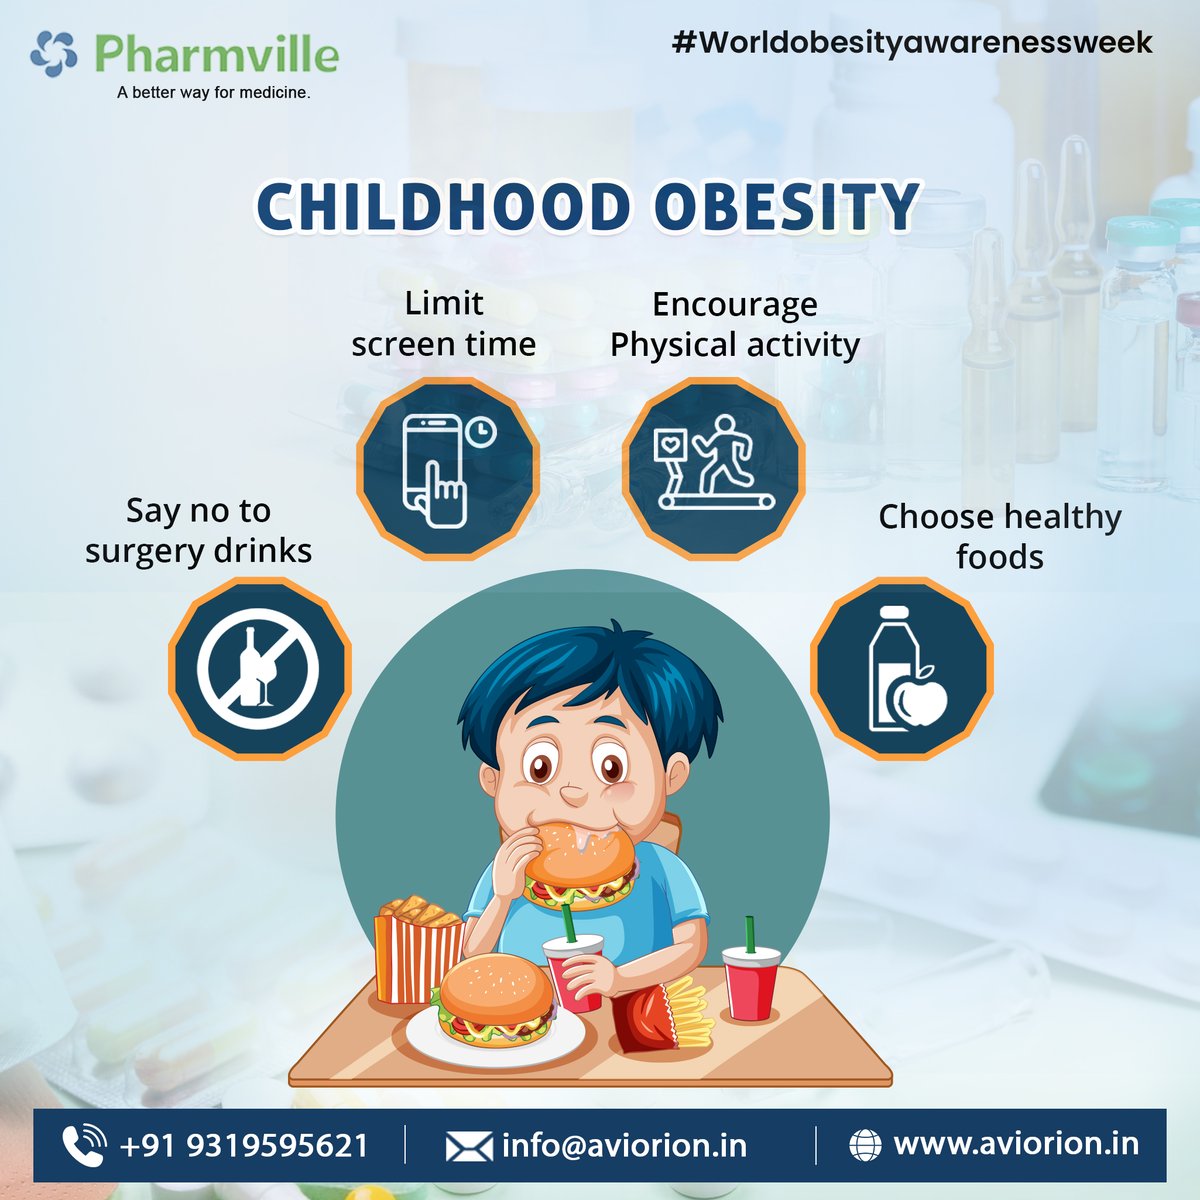 Your health is an investment, not an expense. Let's tackle obesity head-on and promote a happier, healthier world.💚🌍
#aviorion #aviorionpvtltd #pharmville #obesityawarenessweek #healthforall #endweightstigma #healthychoices #loveyourbody #empowerhealth